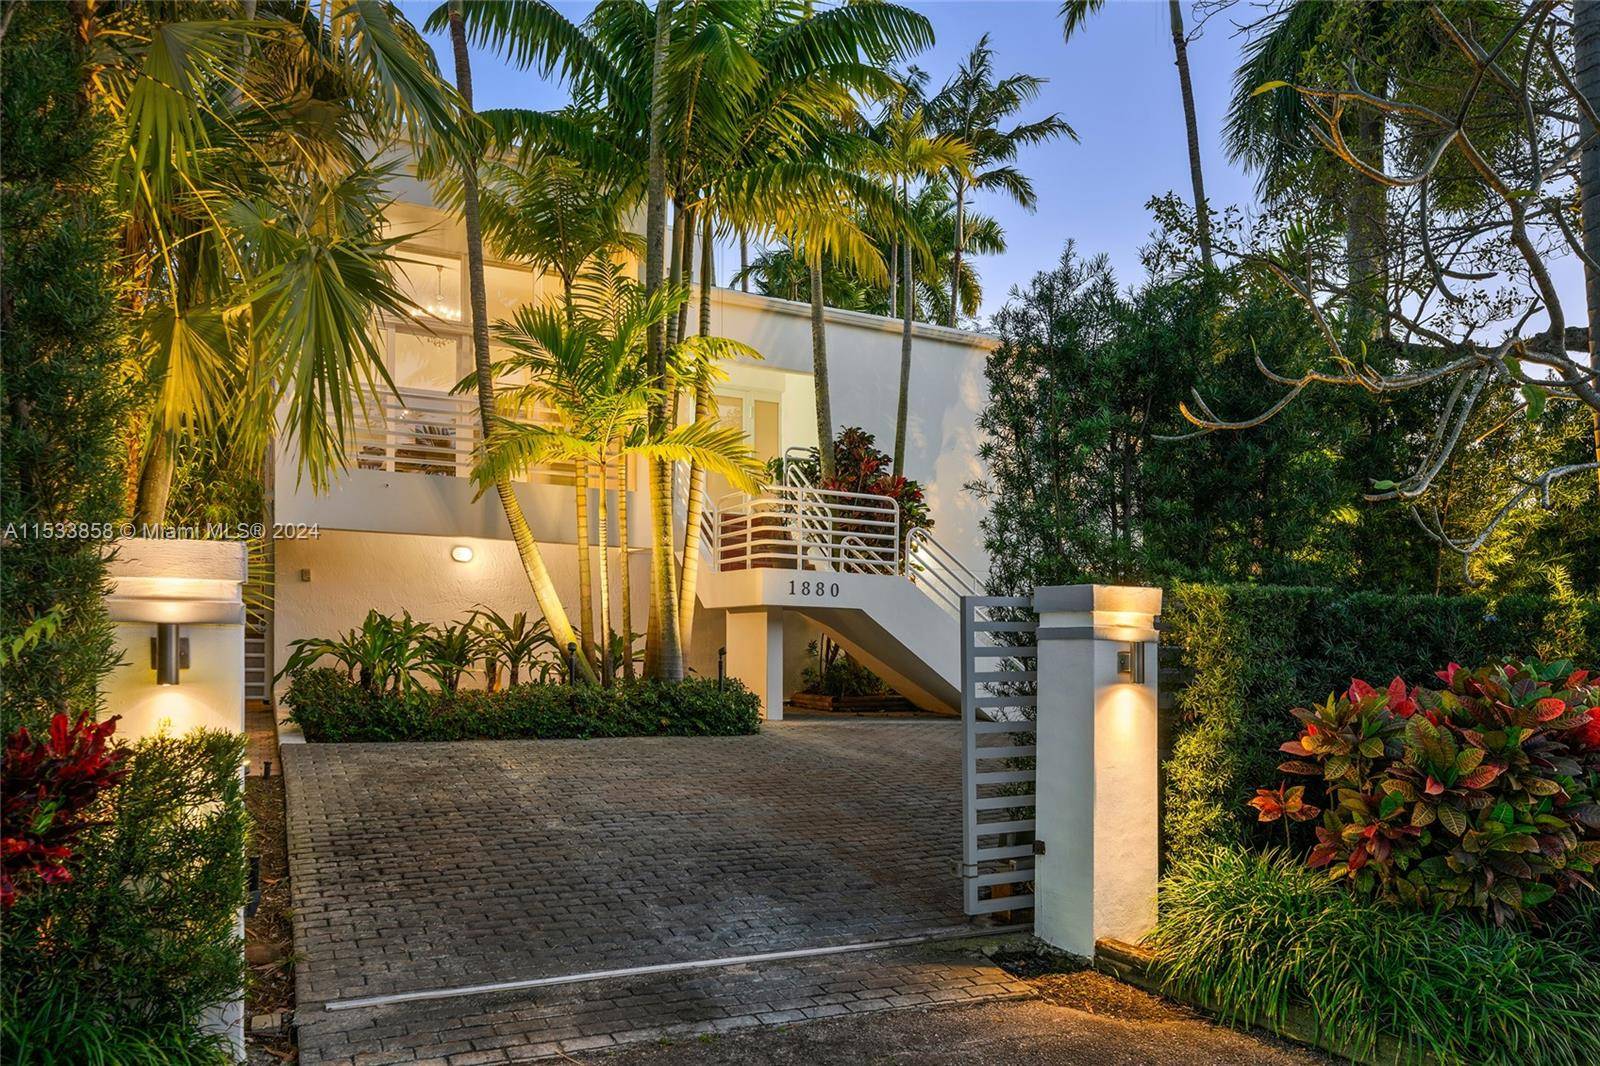 Located in the heart of the much desired North Coconut Grove this tri level home sits on a gated, lushly landscaped 9, 000 SF lot featuring 5BR 4 1BA.